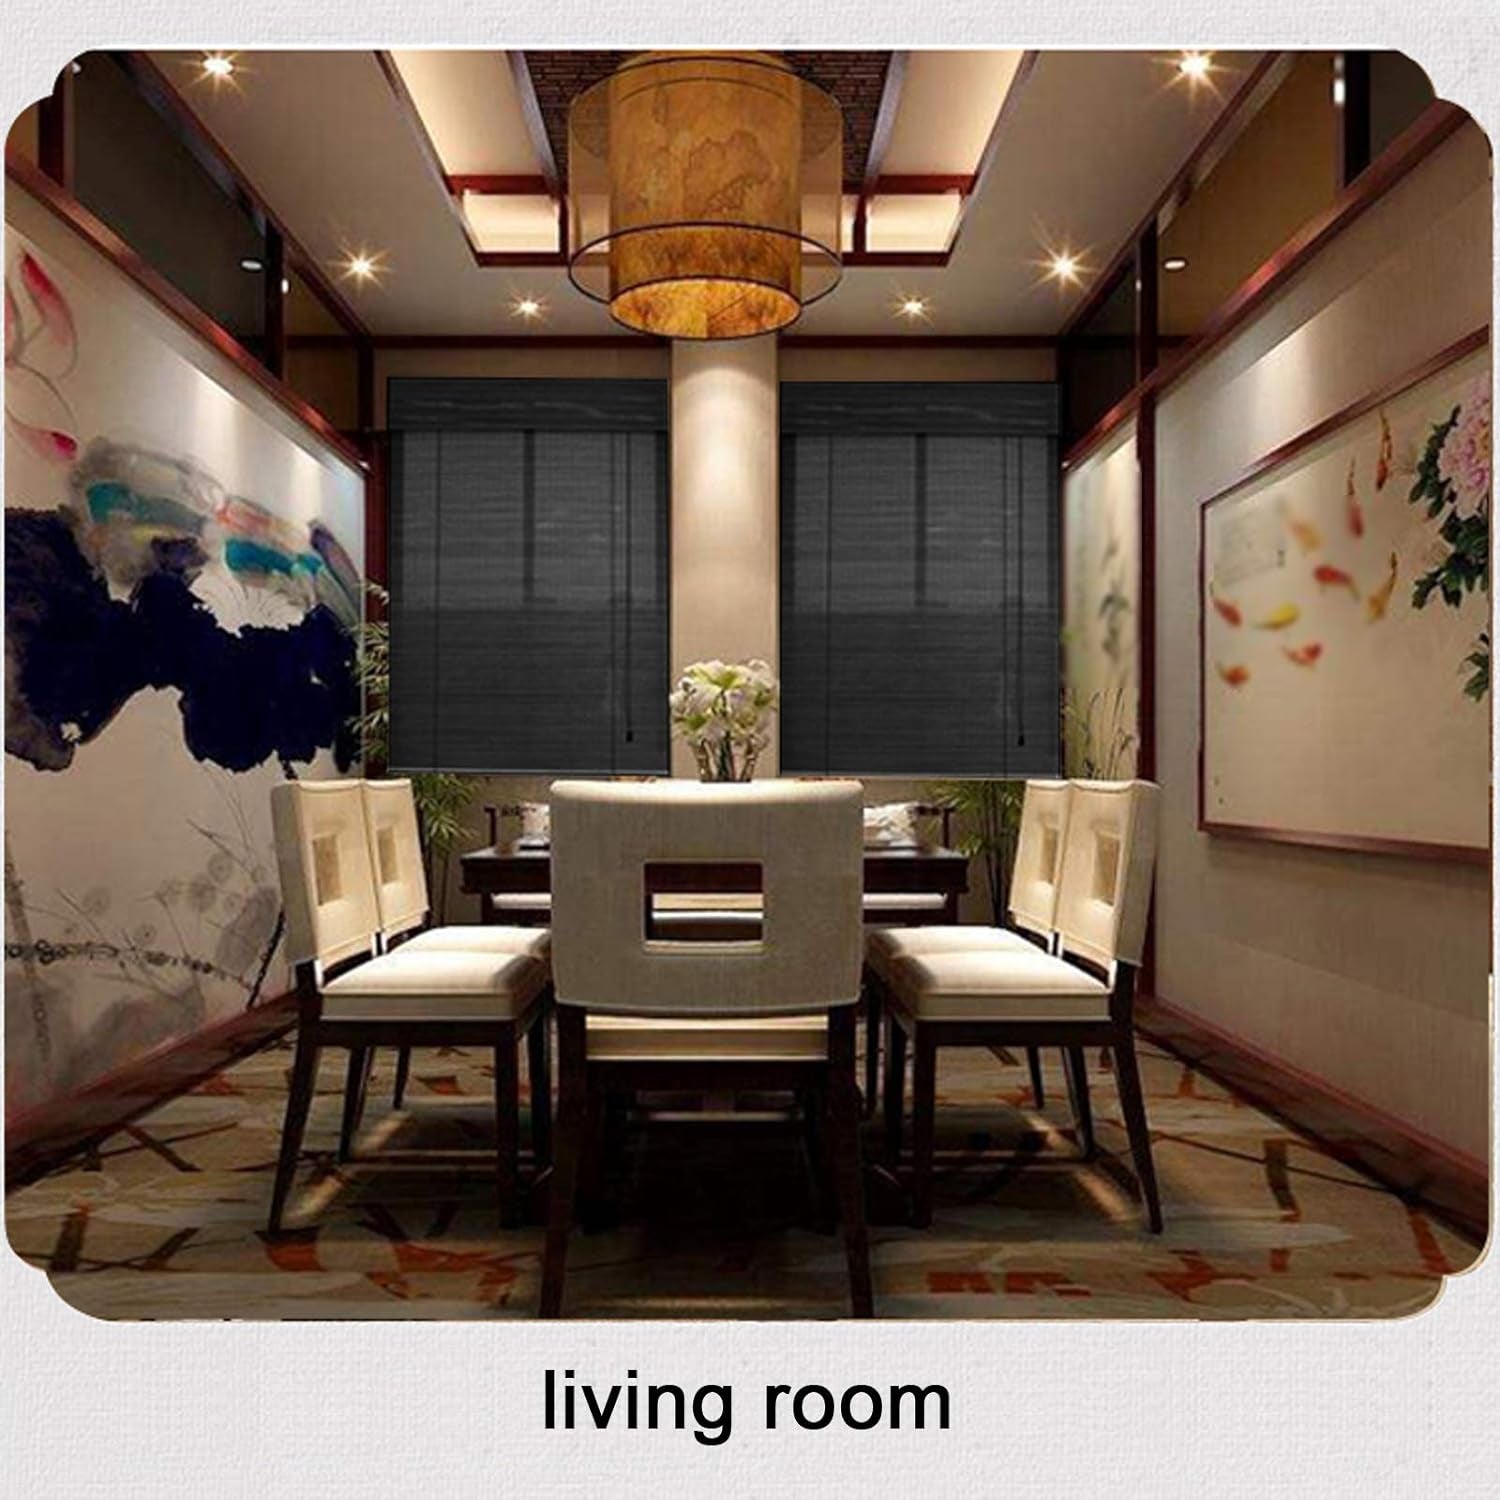 Breathable Black Bamboo Roll up Window,Sunshade Light Filtering Roller Shades,Partition Blackout Roller Shutter,Roman Bamboo Roller Blinds for Tea Room,Customizable (60X180Cm/24X71In)